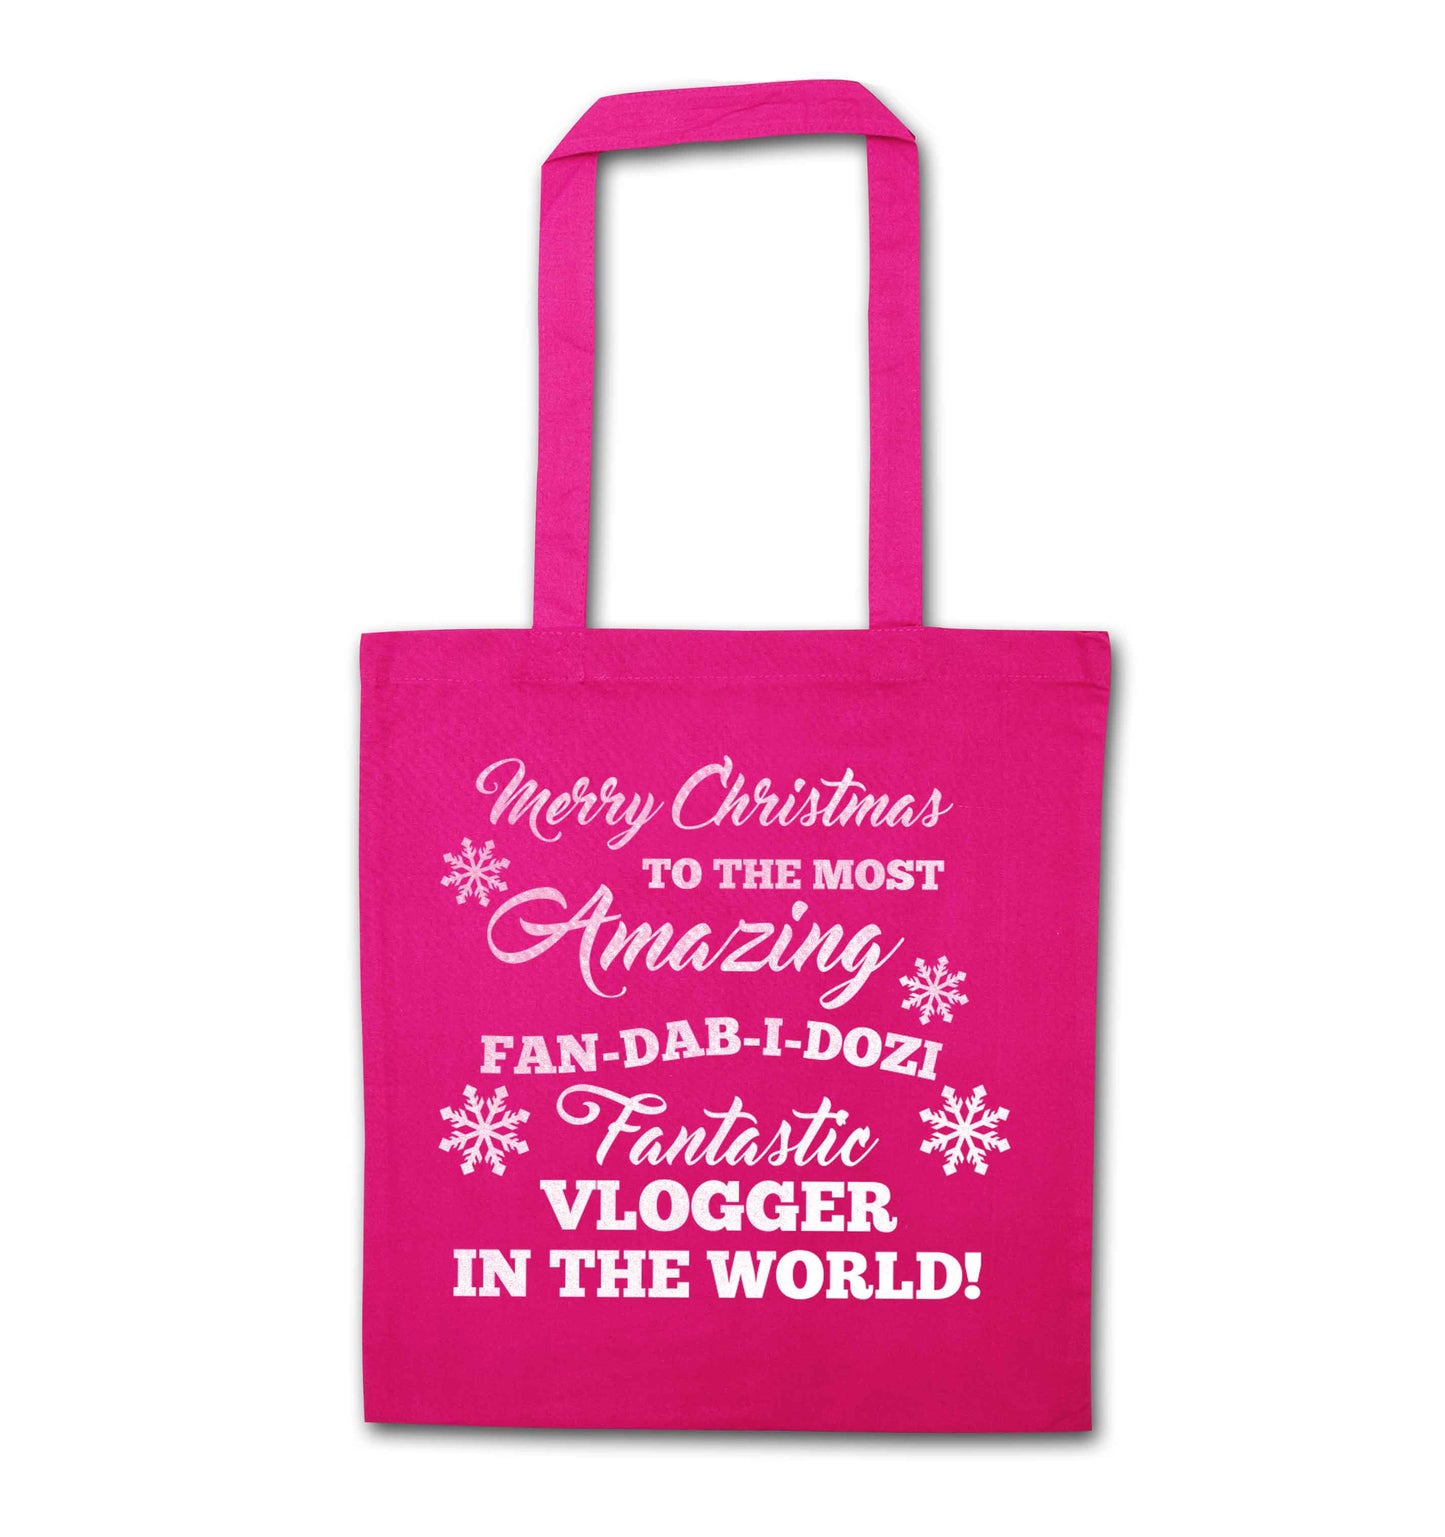 Merry Christmas to the most amazing fan-dab-i-dozi fantasic vlogger in the world pink tote bag